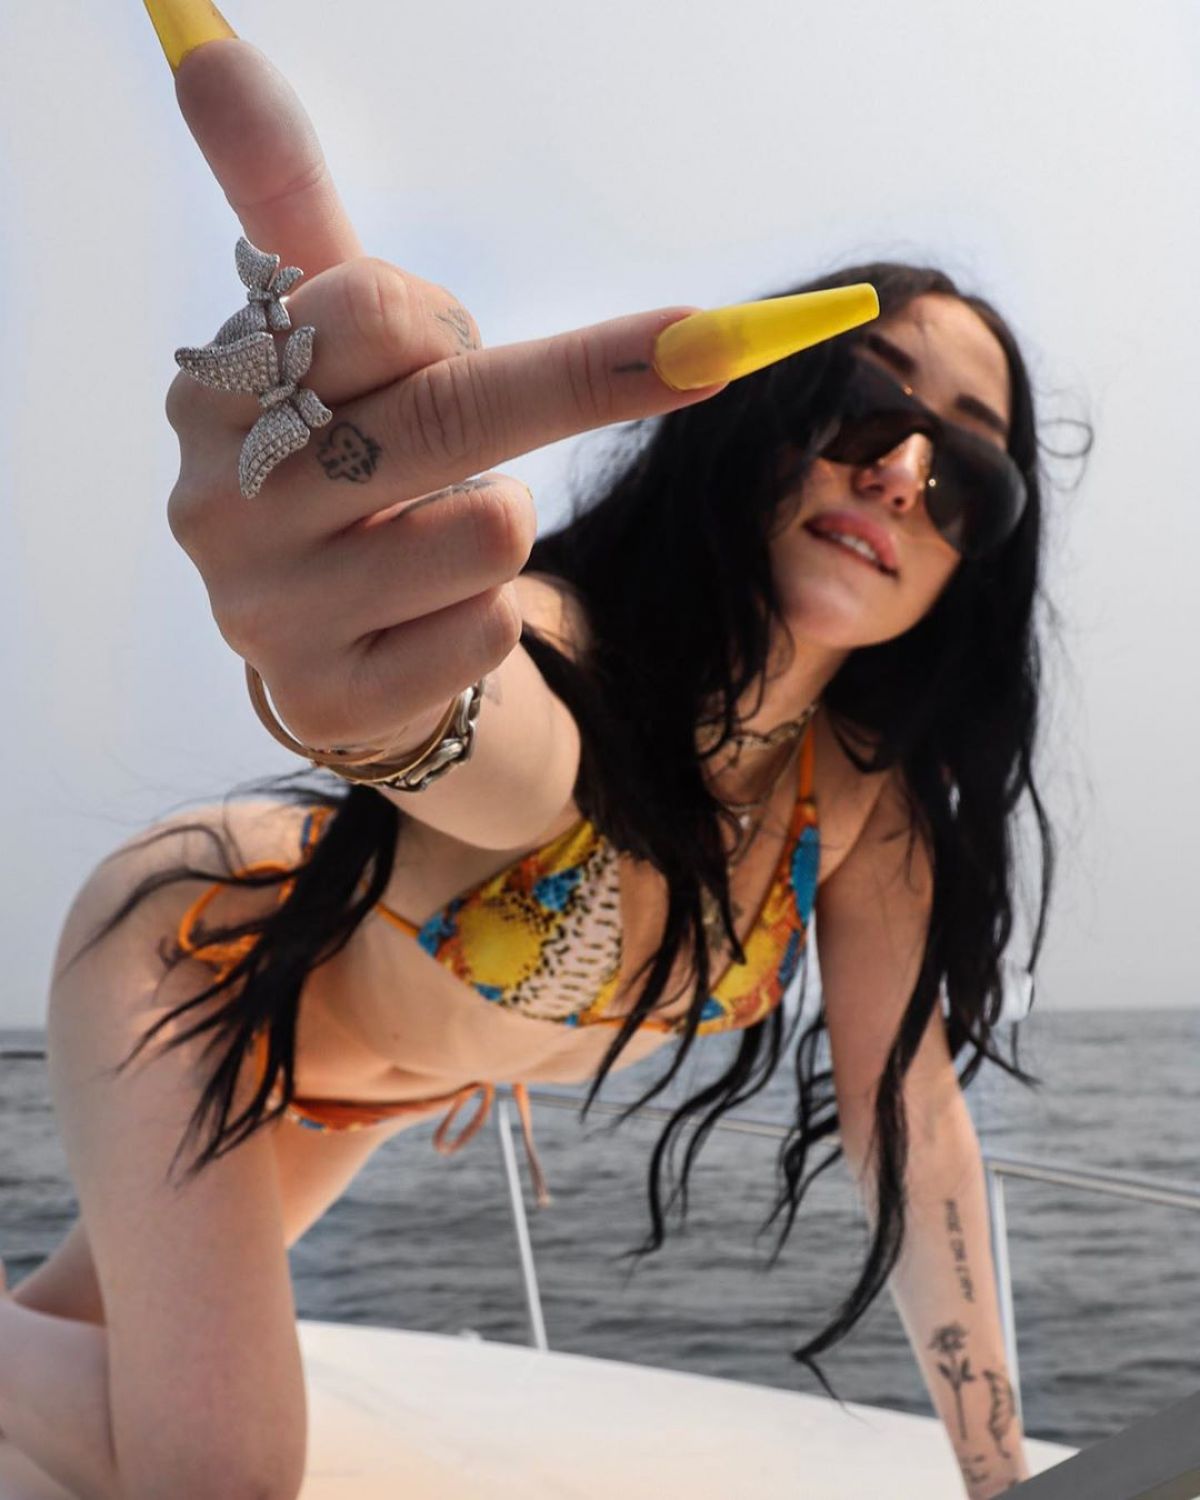 NOAH CYRUS in Bikini at a Boat - Instagram Photos and Video 09/09/2020.